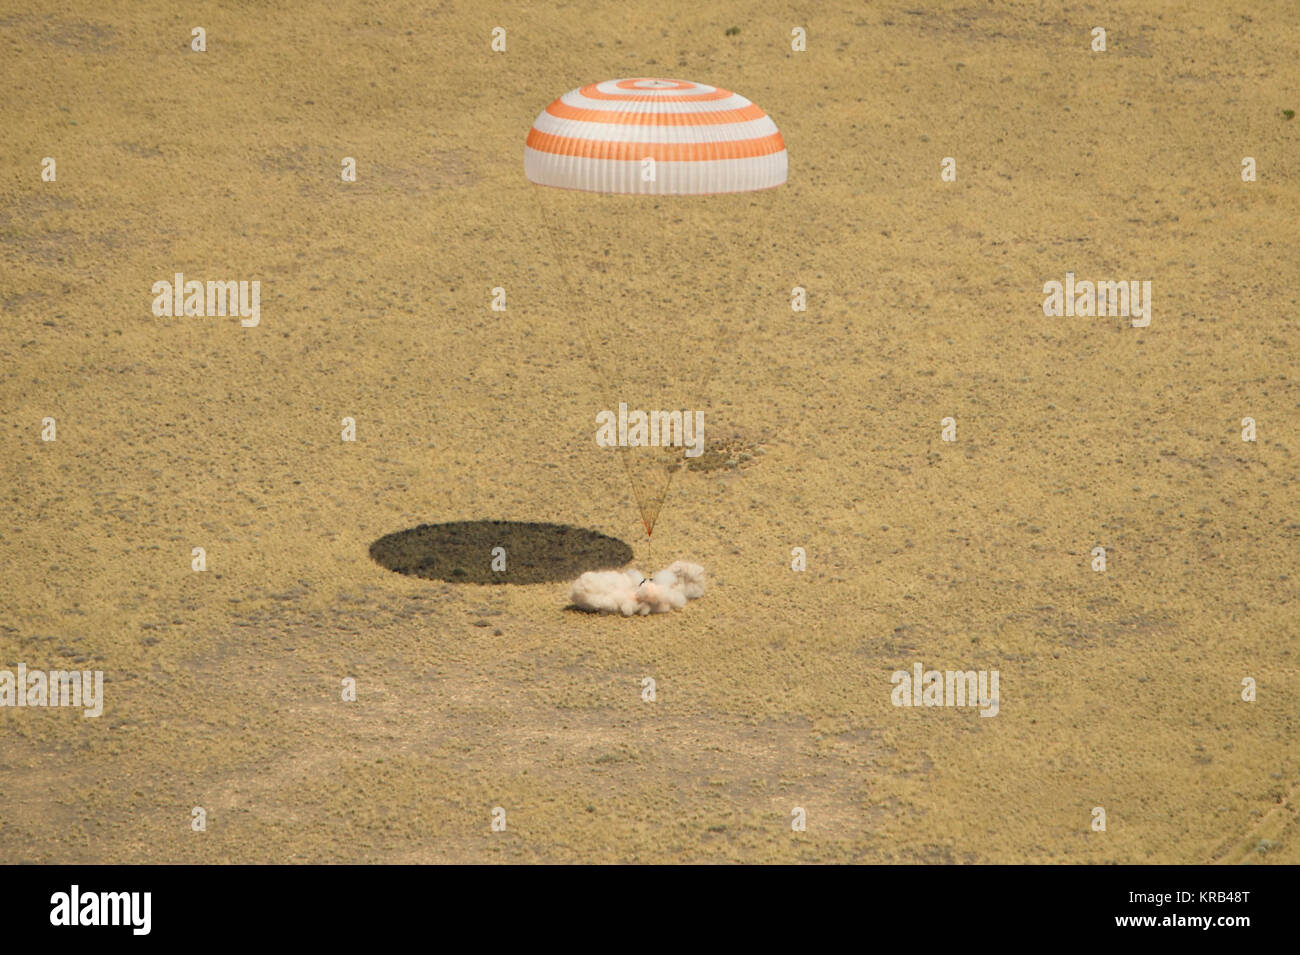 The Soyuz TMA-03M spacecraft is seen as it lands with Expedition 31 Commander Oleg Kononenko of Russia and Flight Engineers Don Pettit of NASA and Andre Kuipers of the European Space Agency in a remote area near the town of Zhezkazgan, Kazakhstan, on Sunday, July 1, 2012.  Pettit, Kononenko and Kuipers returned from more than six months onboard the International Space Station where they served as members of the Expedition 30 and 31 crews. Photo Credit: (NASA/Bill Ingalls) Soyuz TMA-03M capsule lands Stock Photo